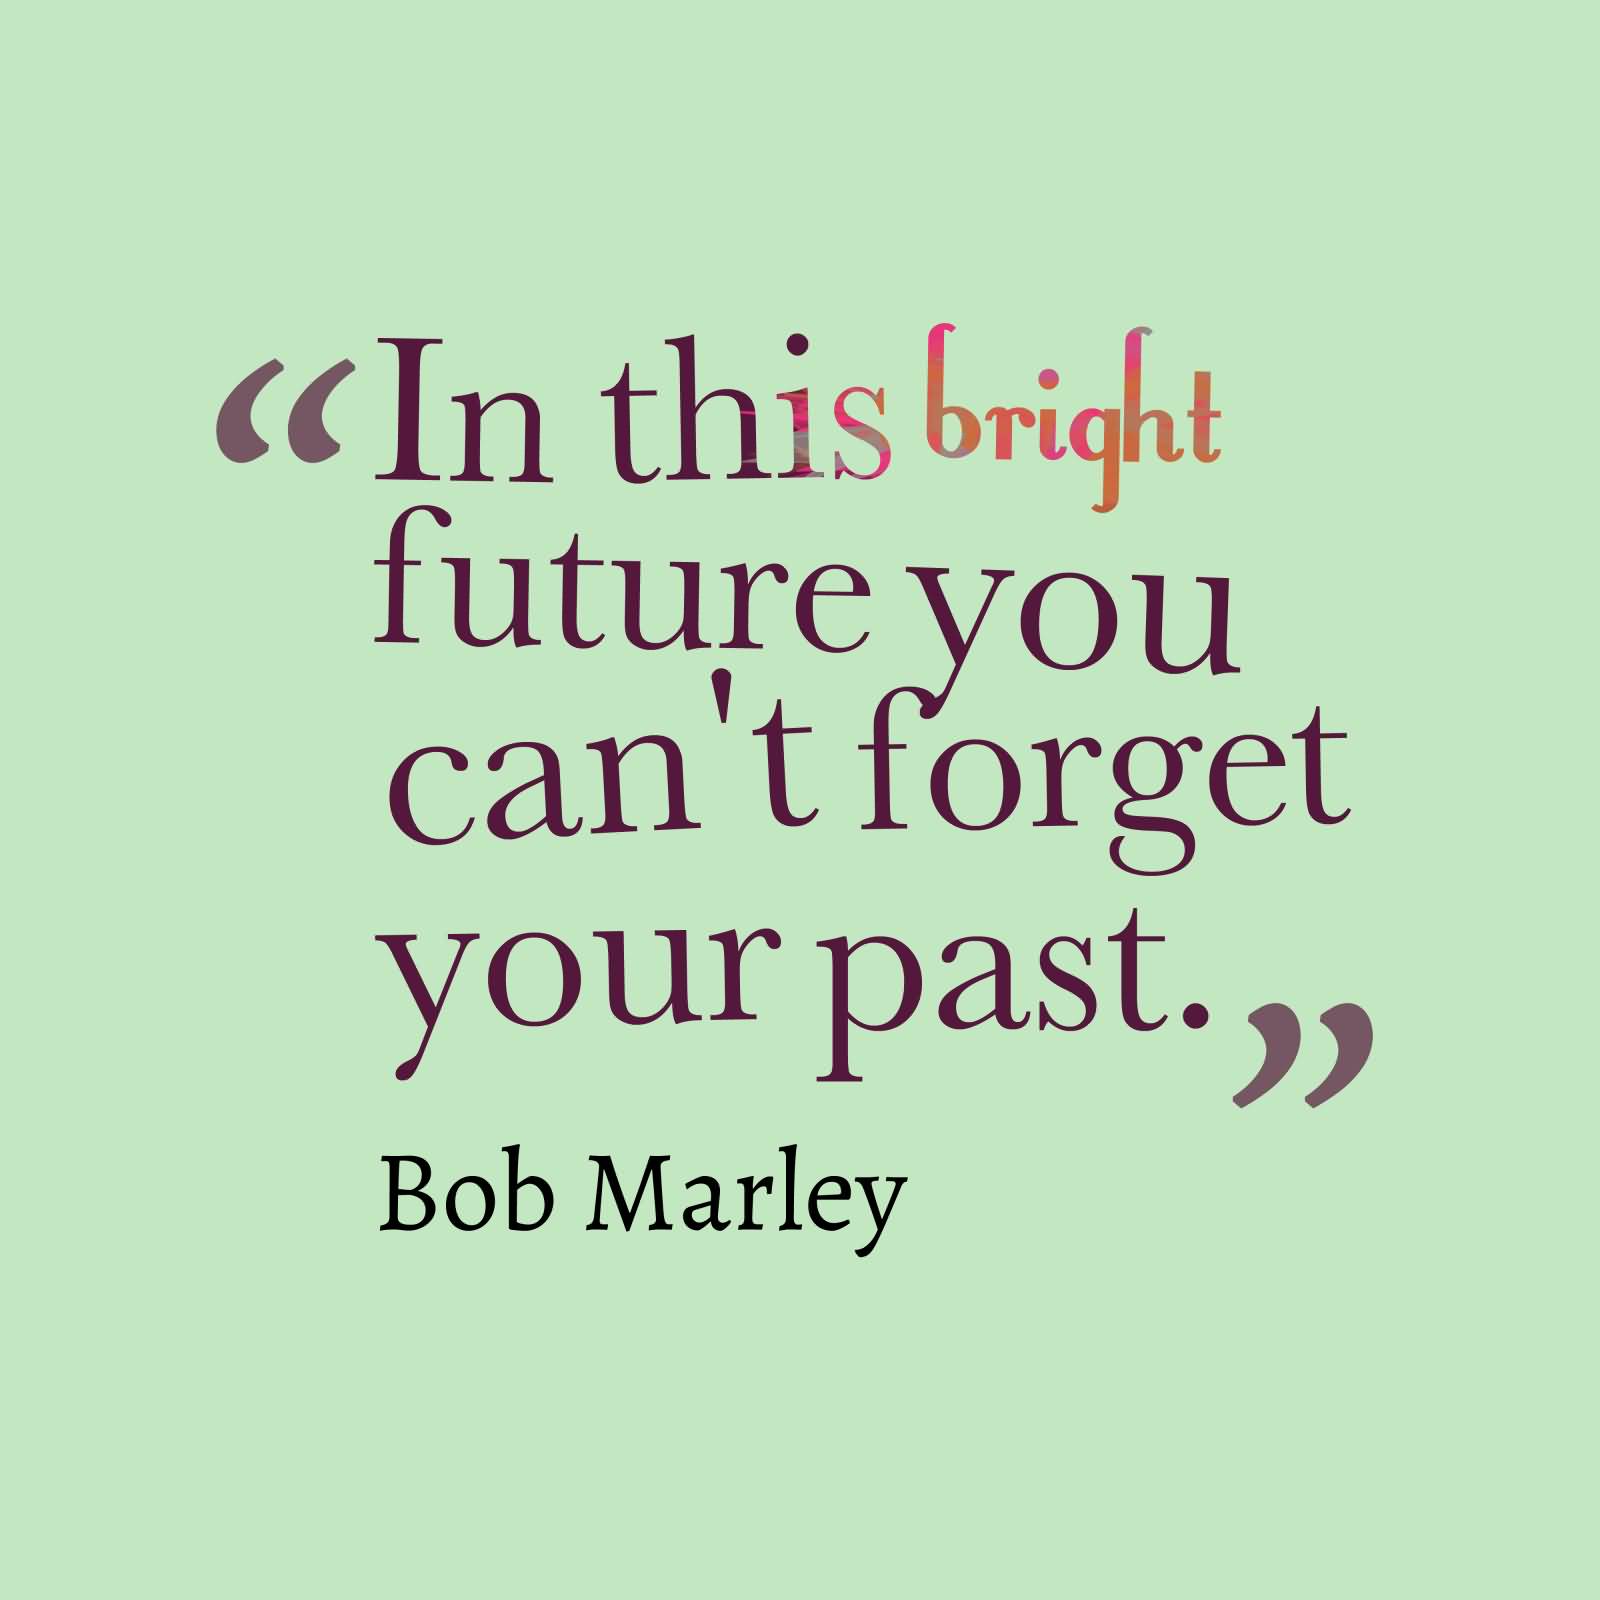 In this bright future you can't forget your past. Bob Marley